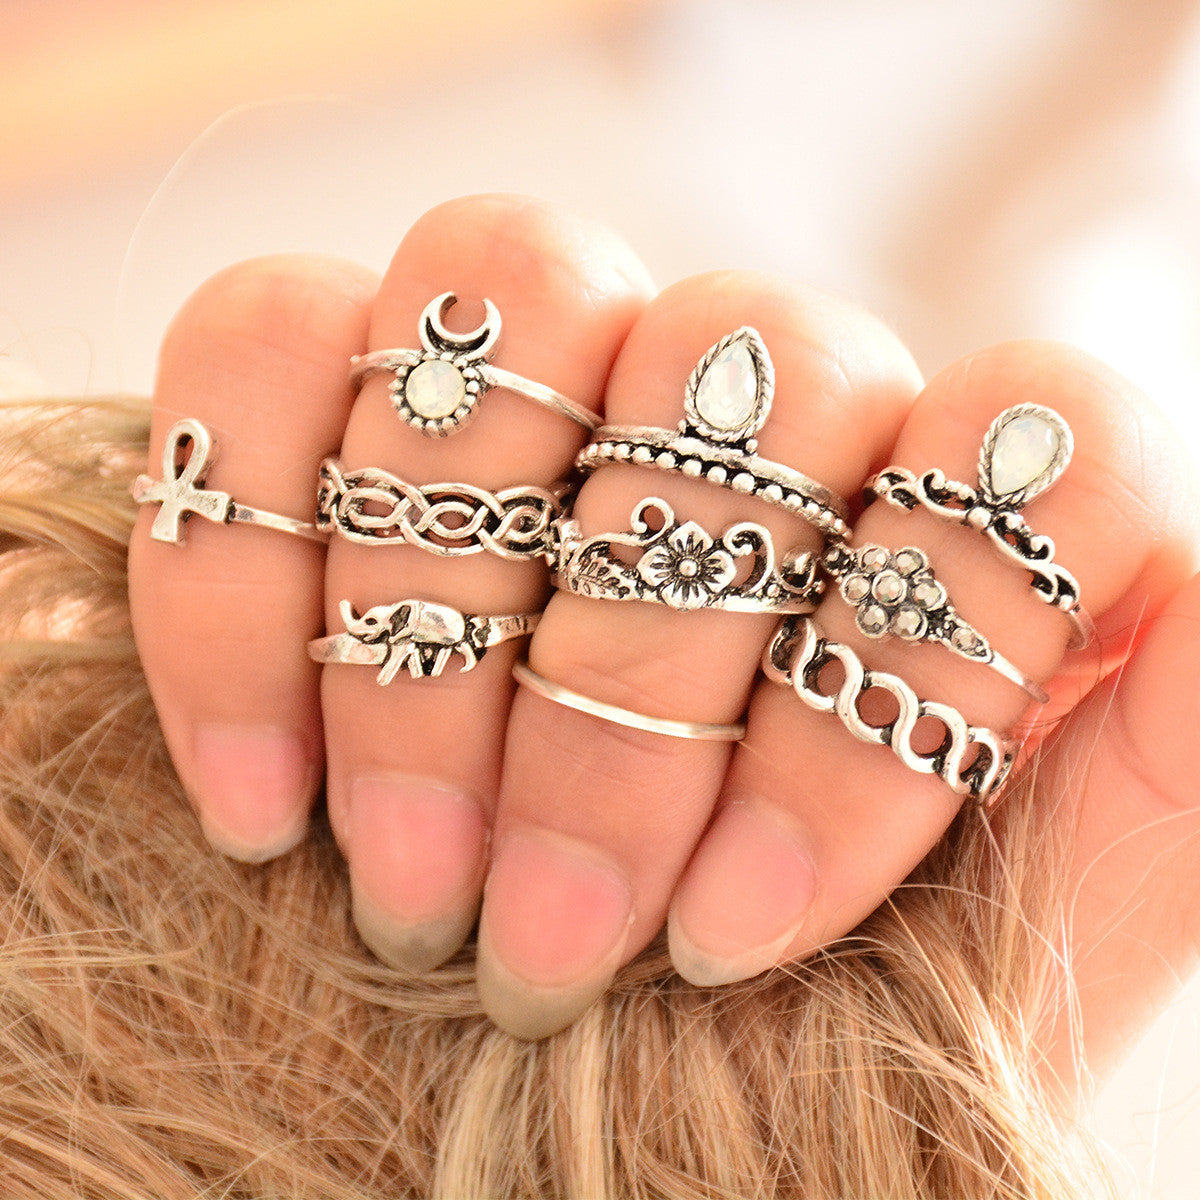 Personality Crystal Combination Suit Rings - Oh Yours Fashion - 1